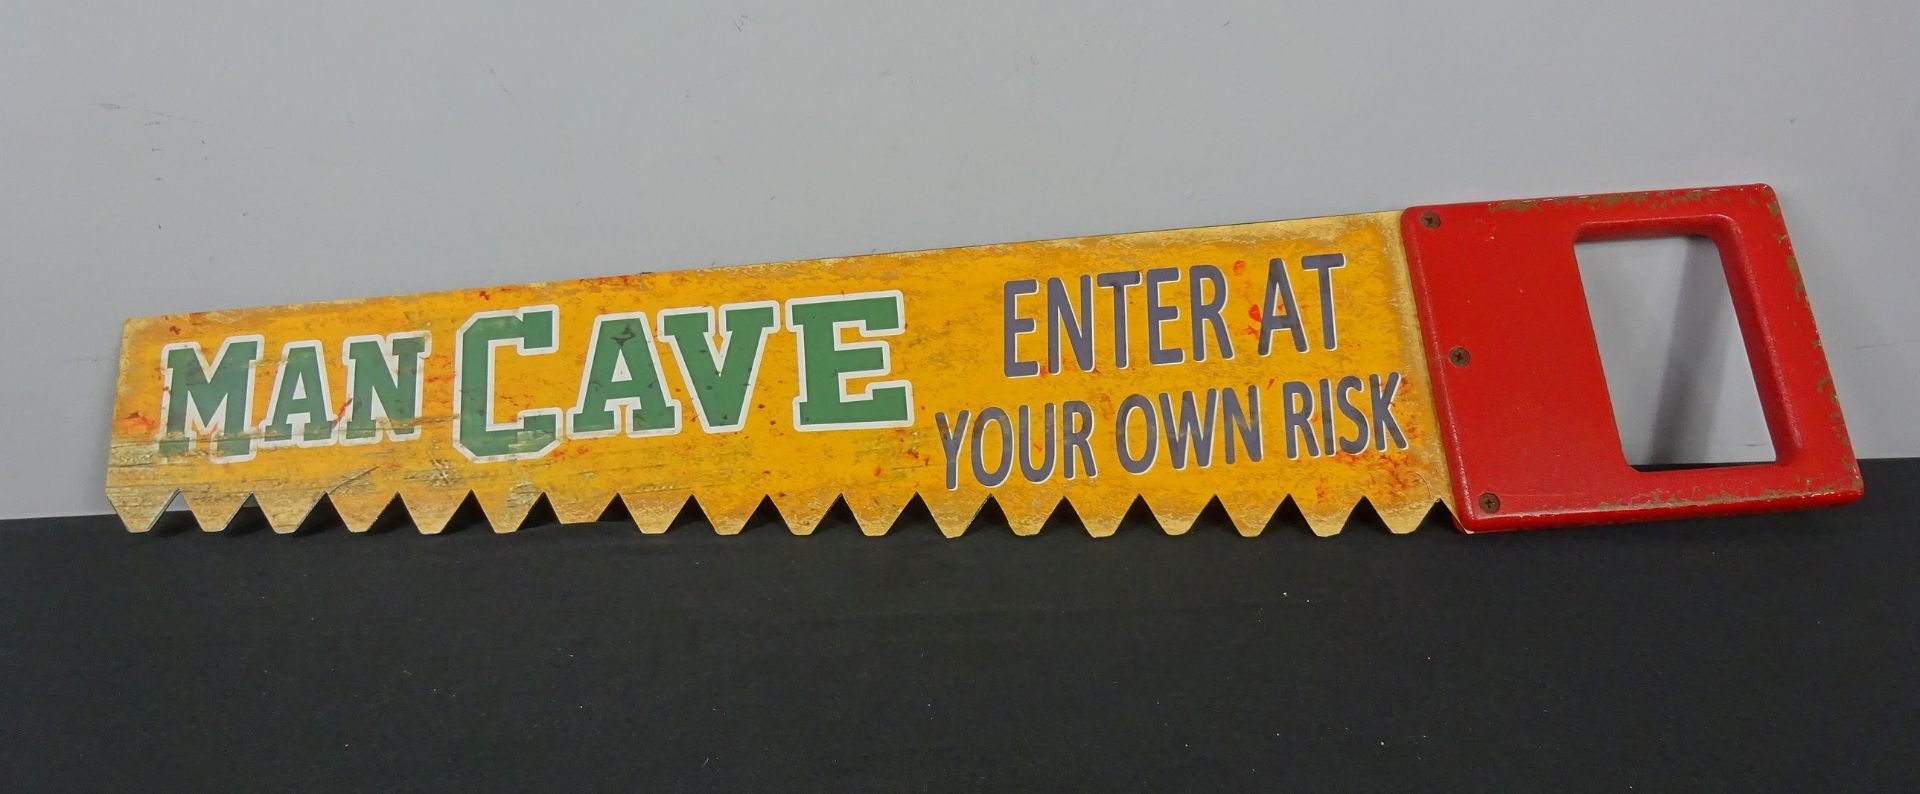 New Man Cave Enter At Your Own Risk Wall Hanging Saw